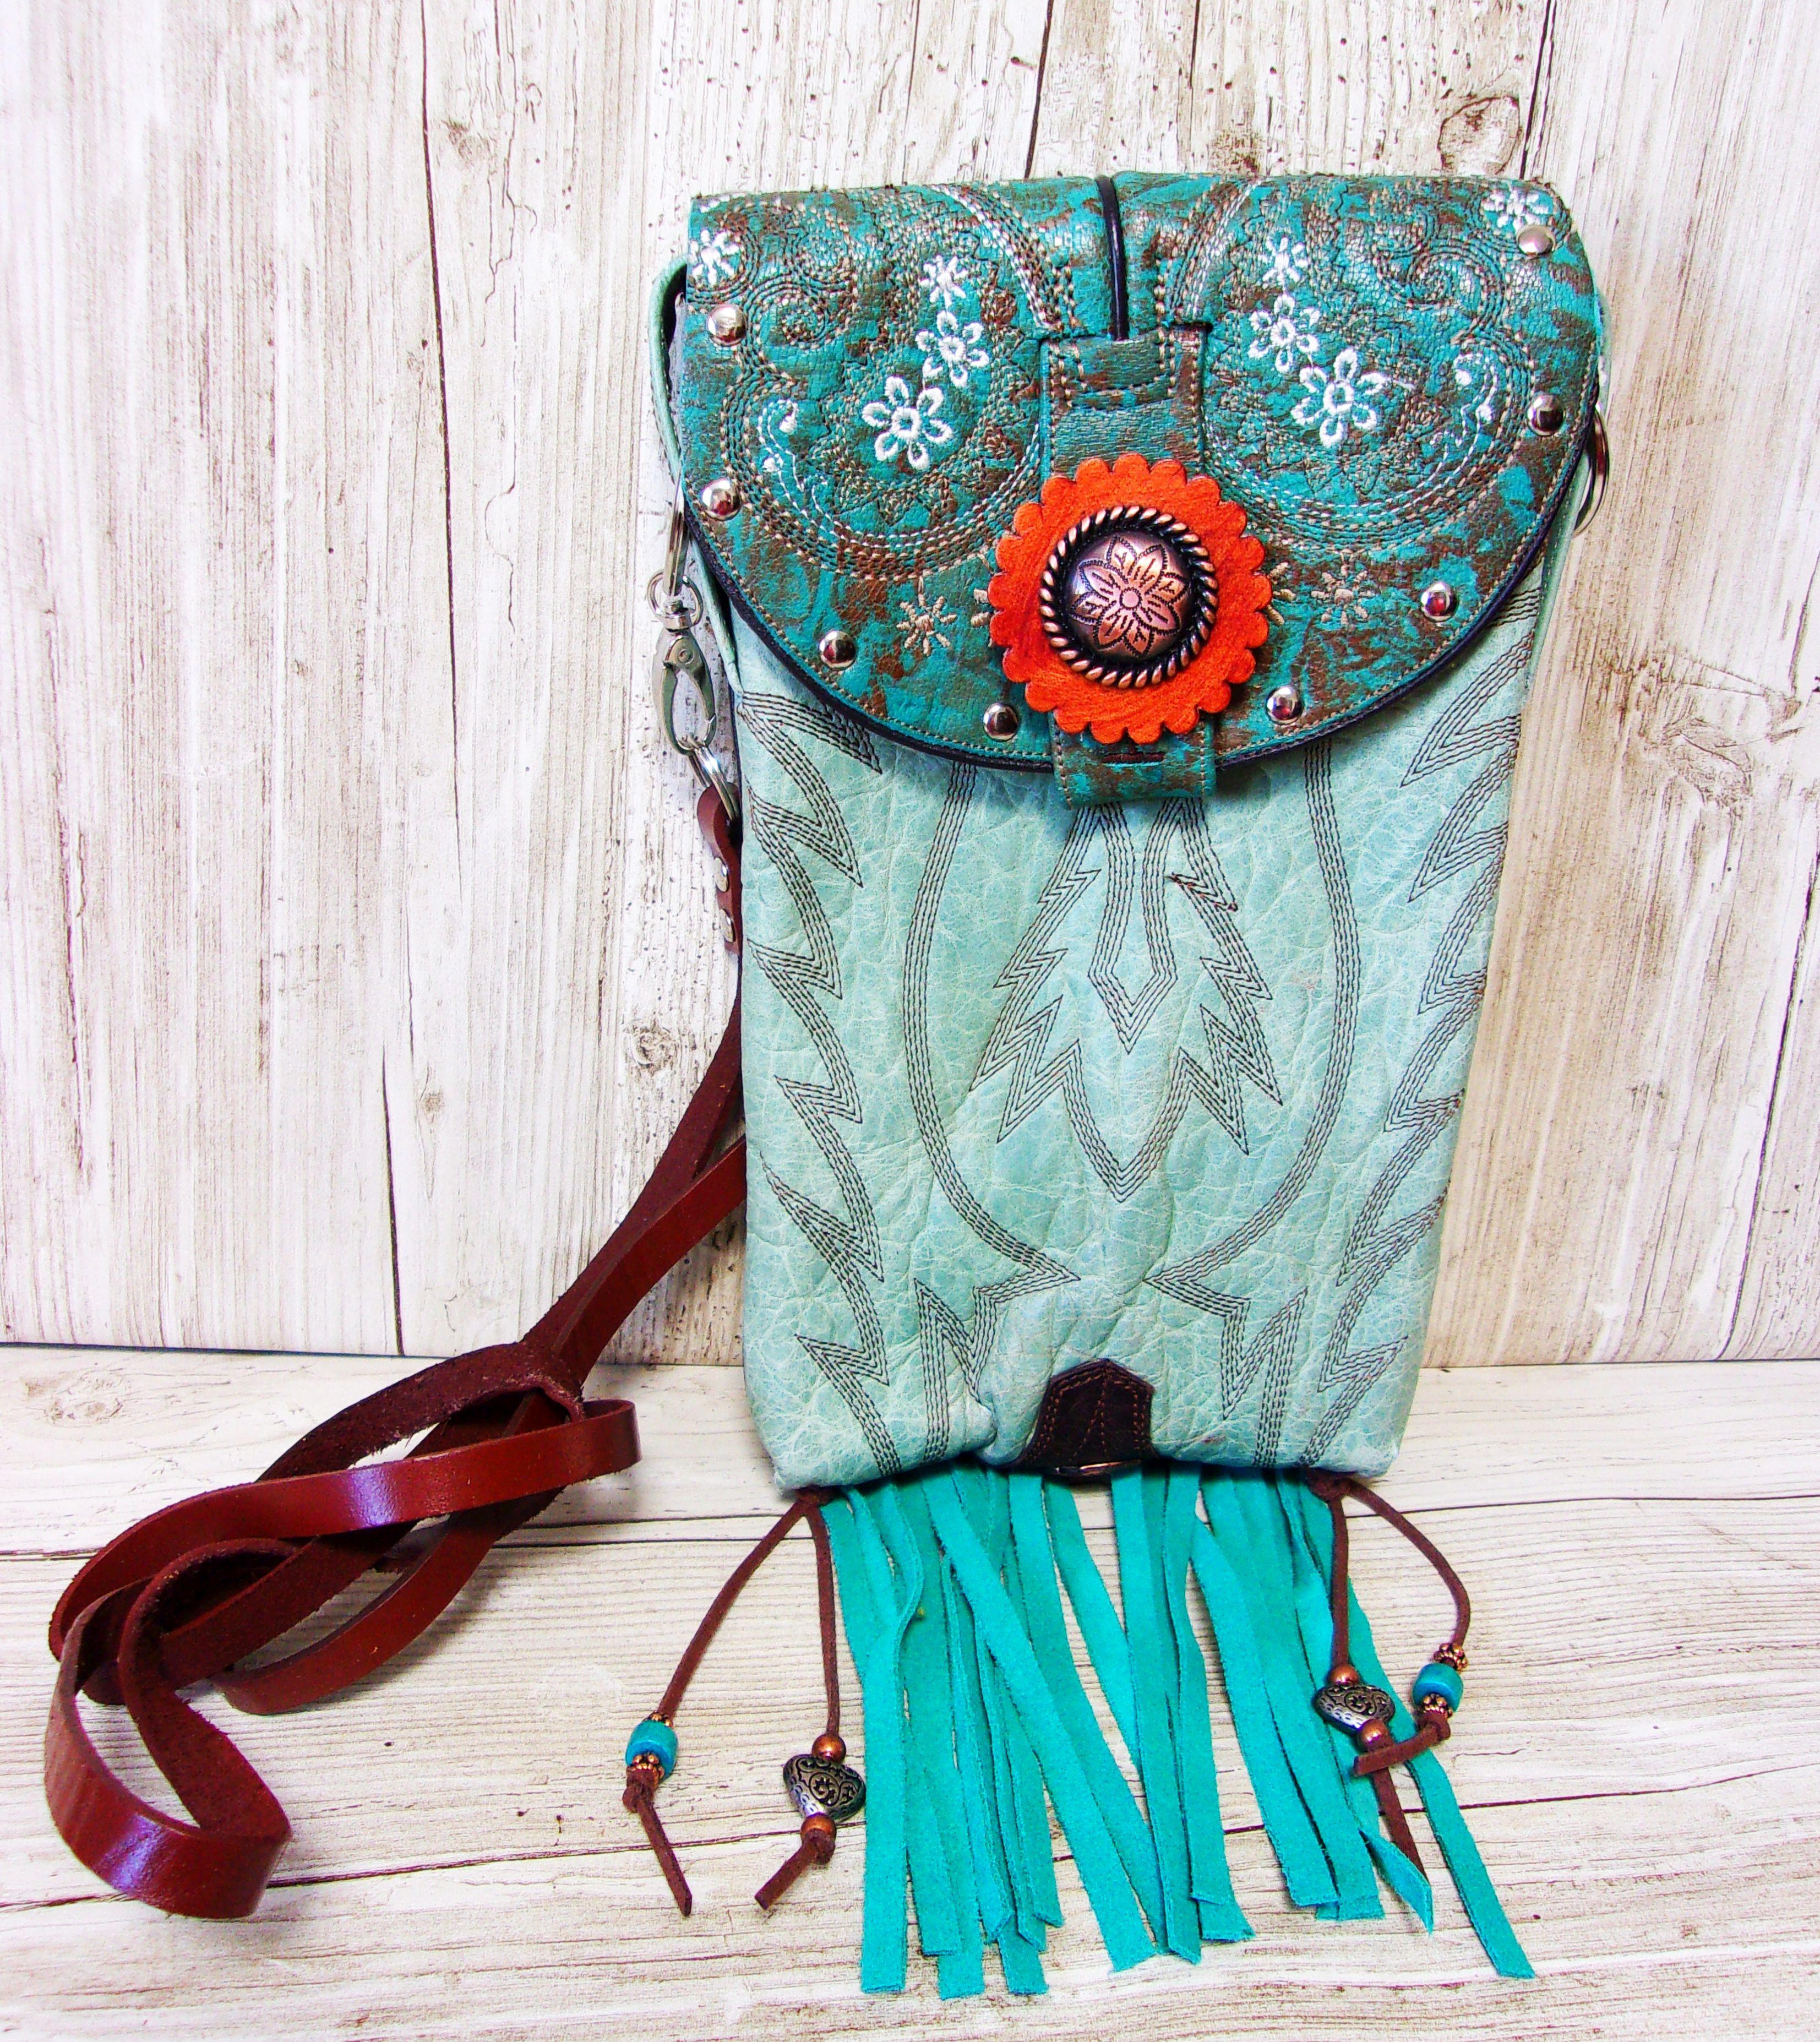 Crossbody Hipster Purse with Fringe – Cowboy Boot Purse – Western Crossbody Bag with Fringe HP804 cowboy boot purses, western fringe purse, handmade leather purses, boot purse, handmade western purse, custom leather handbags Chris Thompson Bags